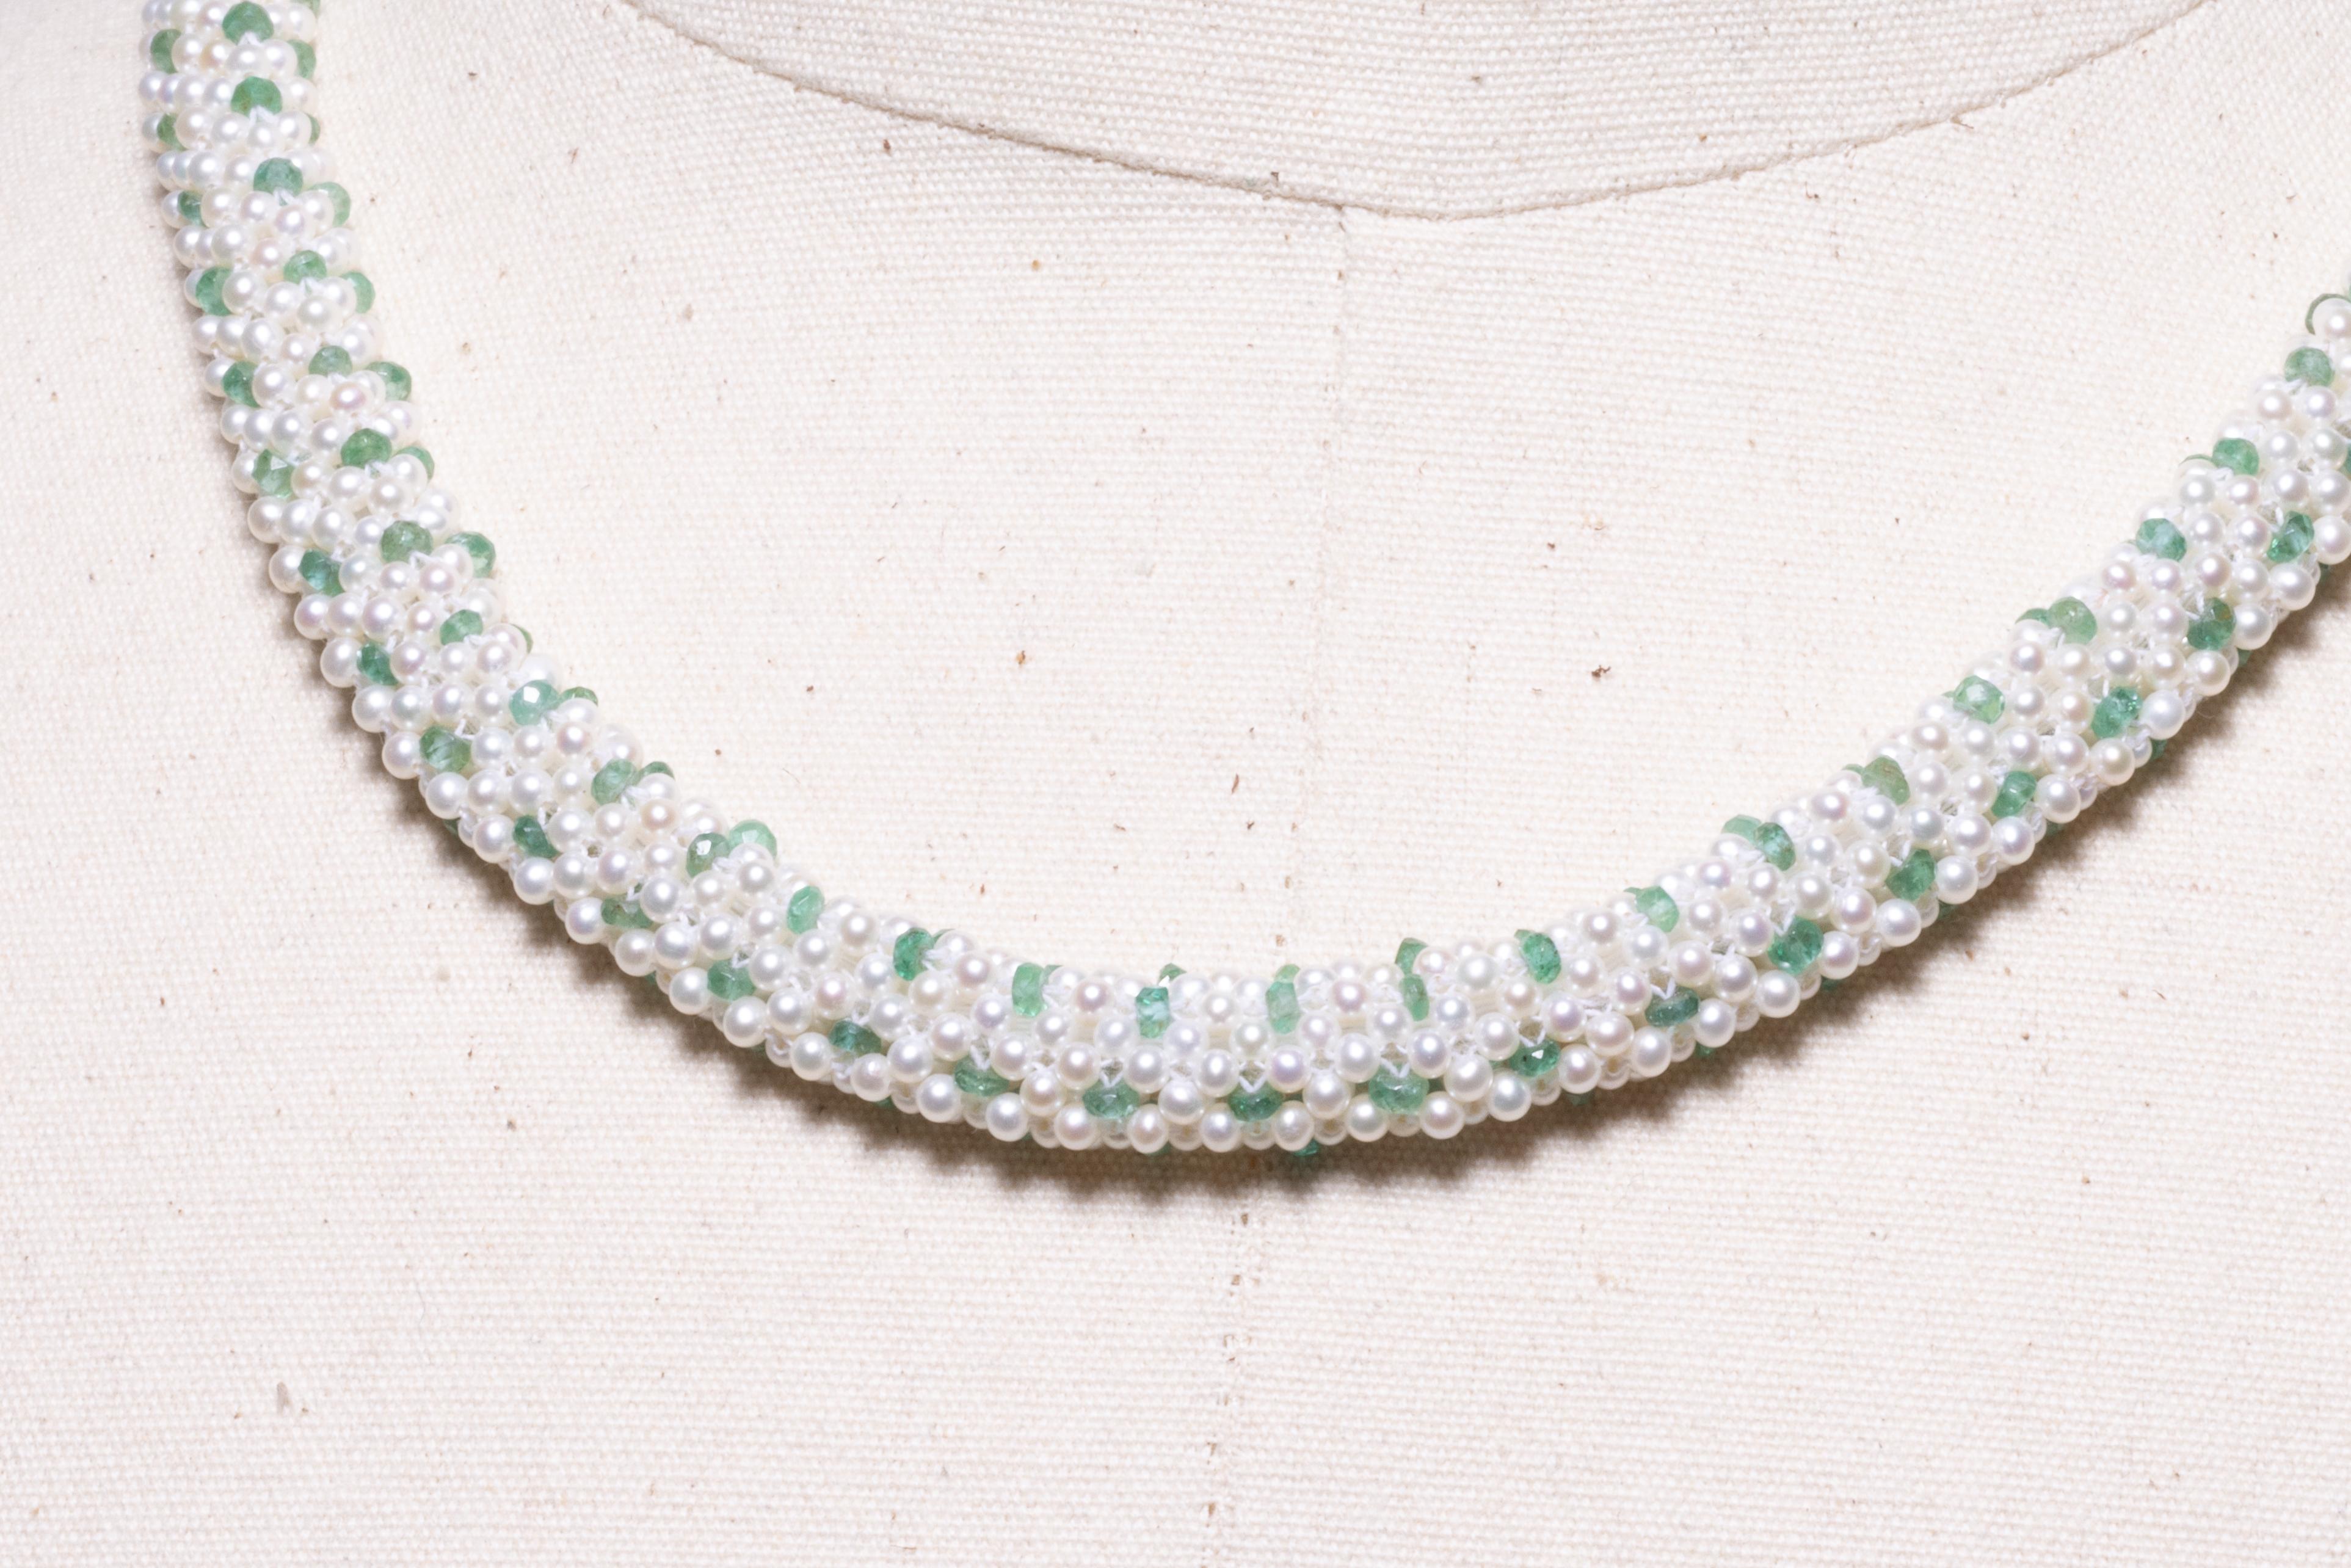 This is an intricately woven necklace of seed pearls and faceted emeralds.  Very unusual with very fine, detailed craftsmanship.  It has an 18K gold clasp with an extra inch of chain to adjust the length between 19 and 20 inches.  The shape is flat